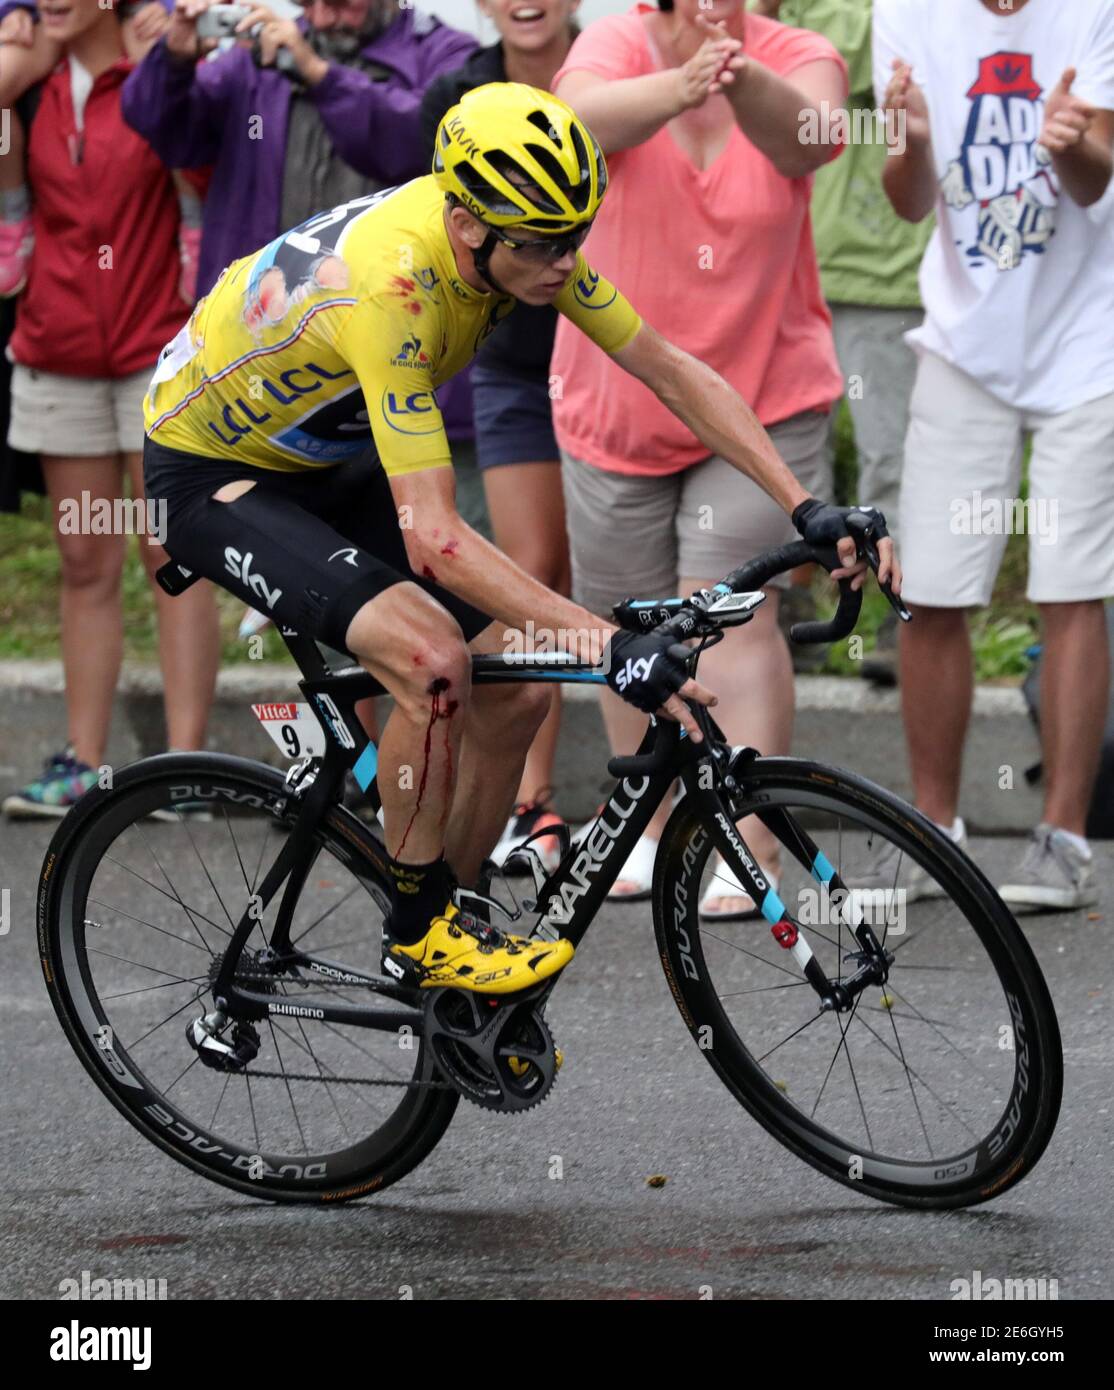 Cycling - Tour de France cycling race - The 146 km (90 miles) Stage 19 from Albertville to Saint-Gervais Mont Blanc, France - 22/07/2016  - Yellow jersey leader Team Sky rider Chris Froome of Britain rides after a fall during the stage.   REUTERS/Kenzo Tribouillard/Pool Stock Photo